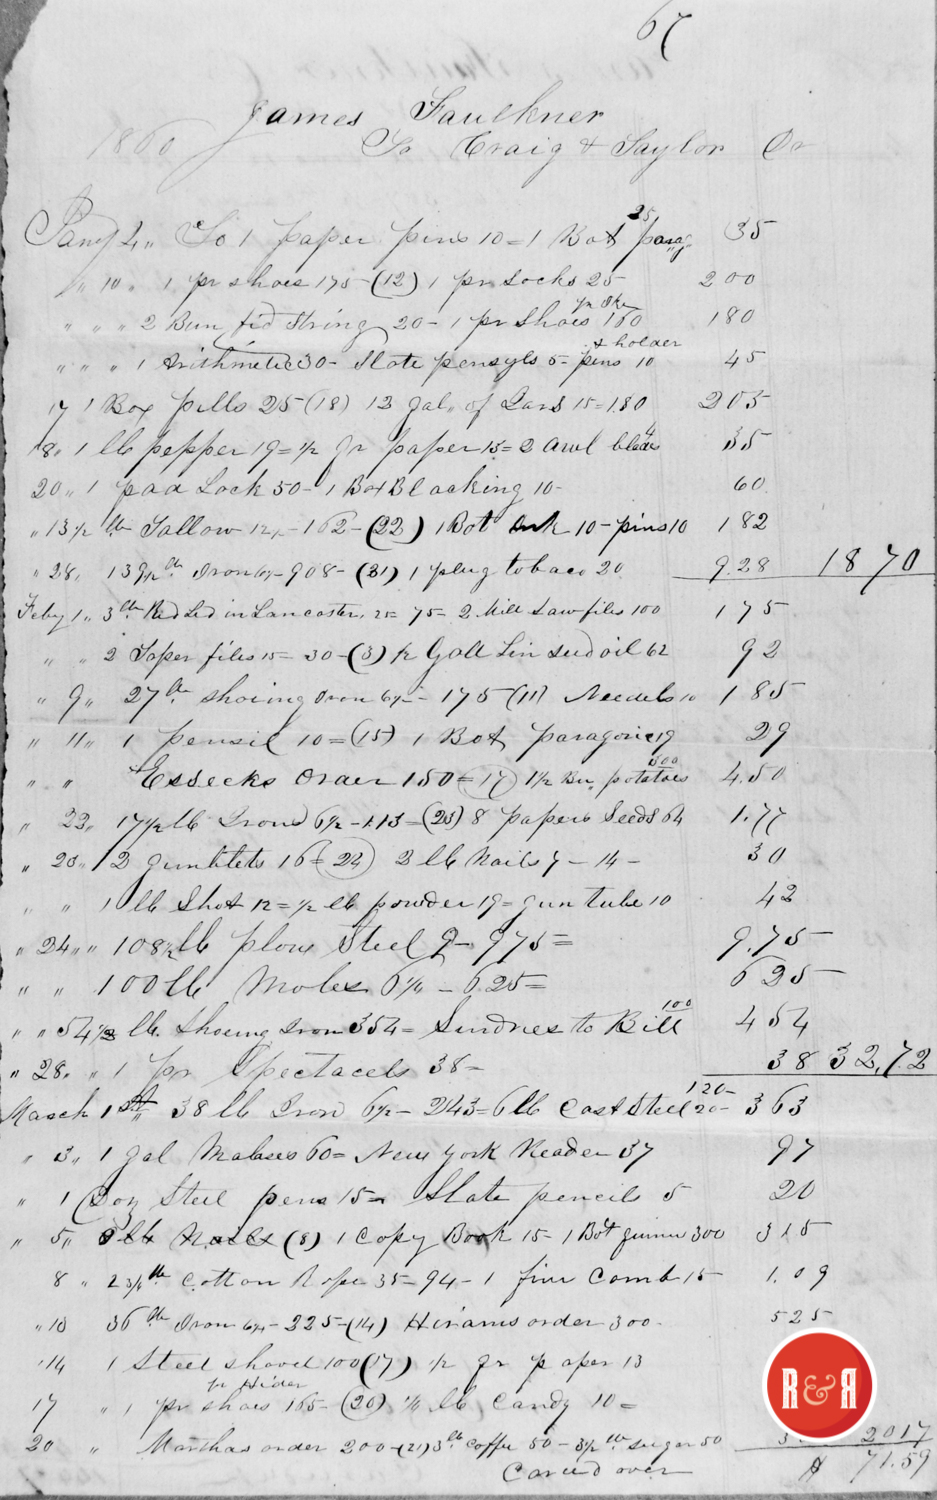 LEDGER FROM CRAIG AND TAYLOR - 1860, p. 1